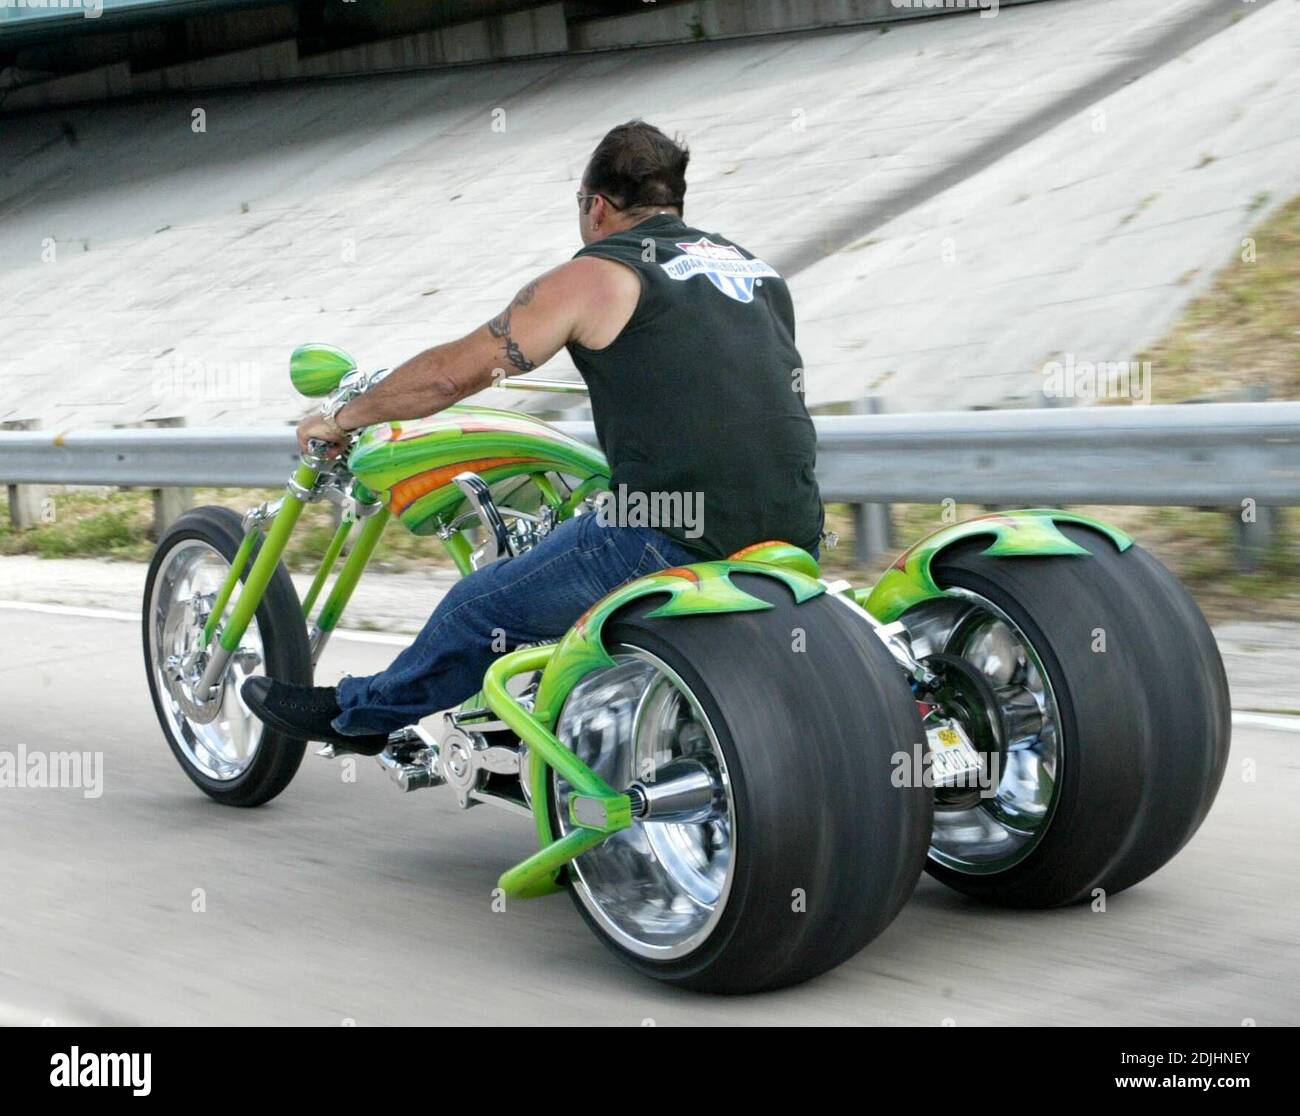 Exclusive!! The quest to build the most extreme choppers is alive and well in the USA. Chop Shops like West Coast Choppers and Orange County Choppers are constantly competing  to build the coolest bikes. This "Super Trike" was spotted on a Miami freeway, but when our photographer waved him over to find out more about this outrageous machine, the rider simply dropped a gear on his "suicide shift" and disappered to the horizon, Miami, FL, 4/22/06 Stock Photo